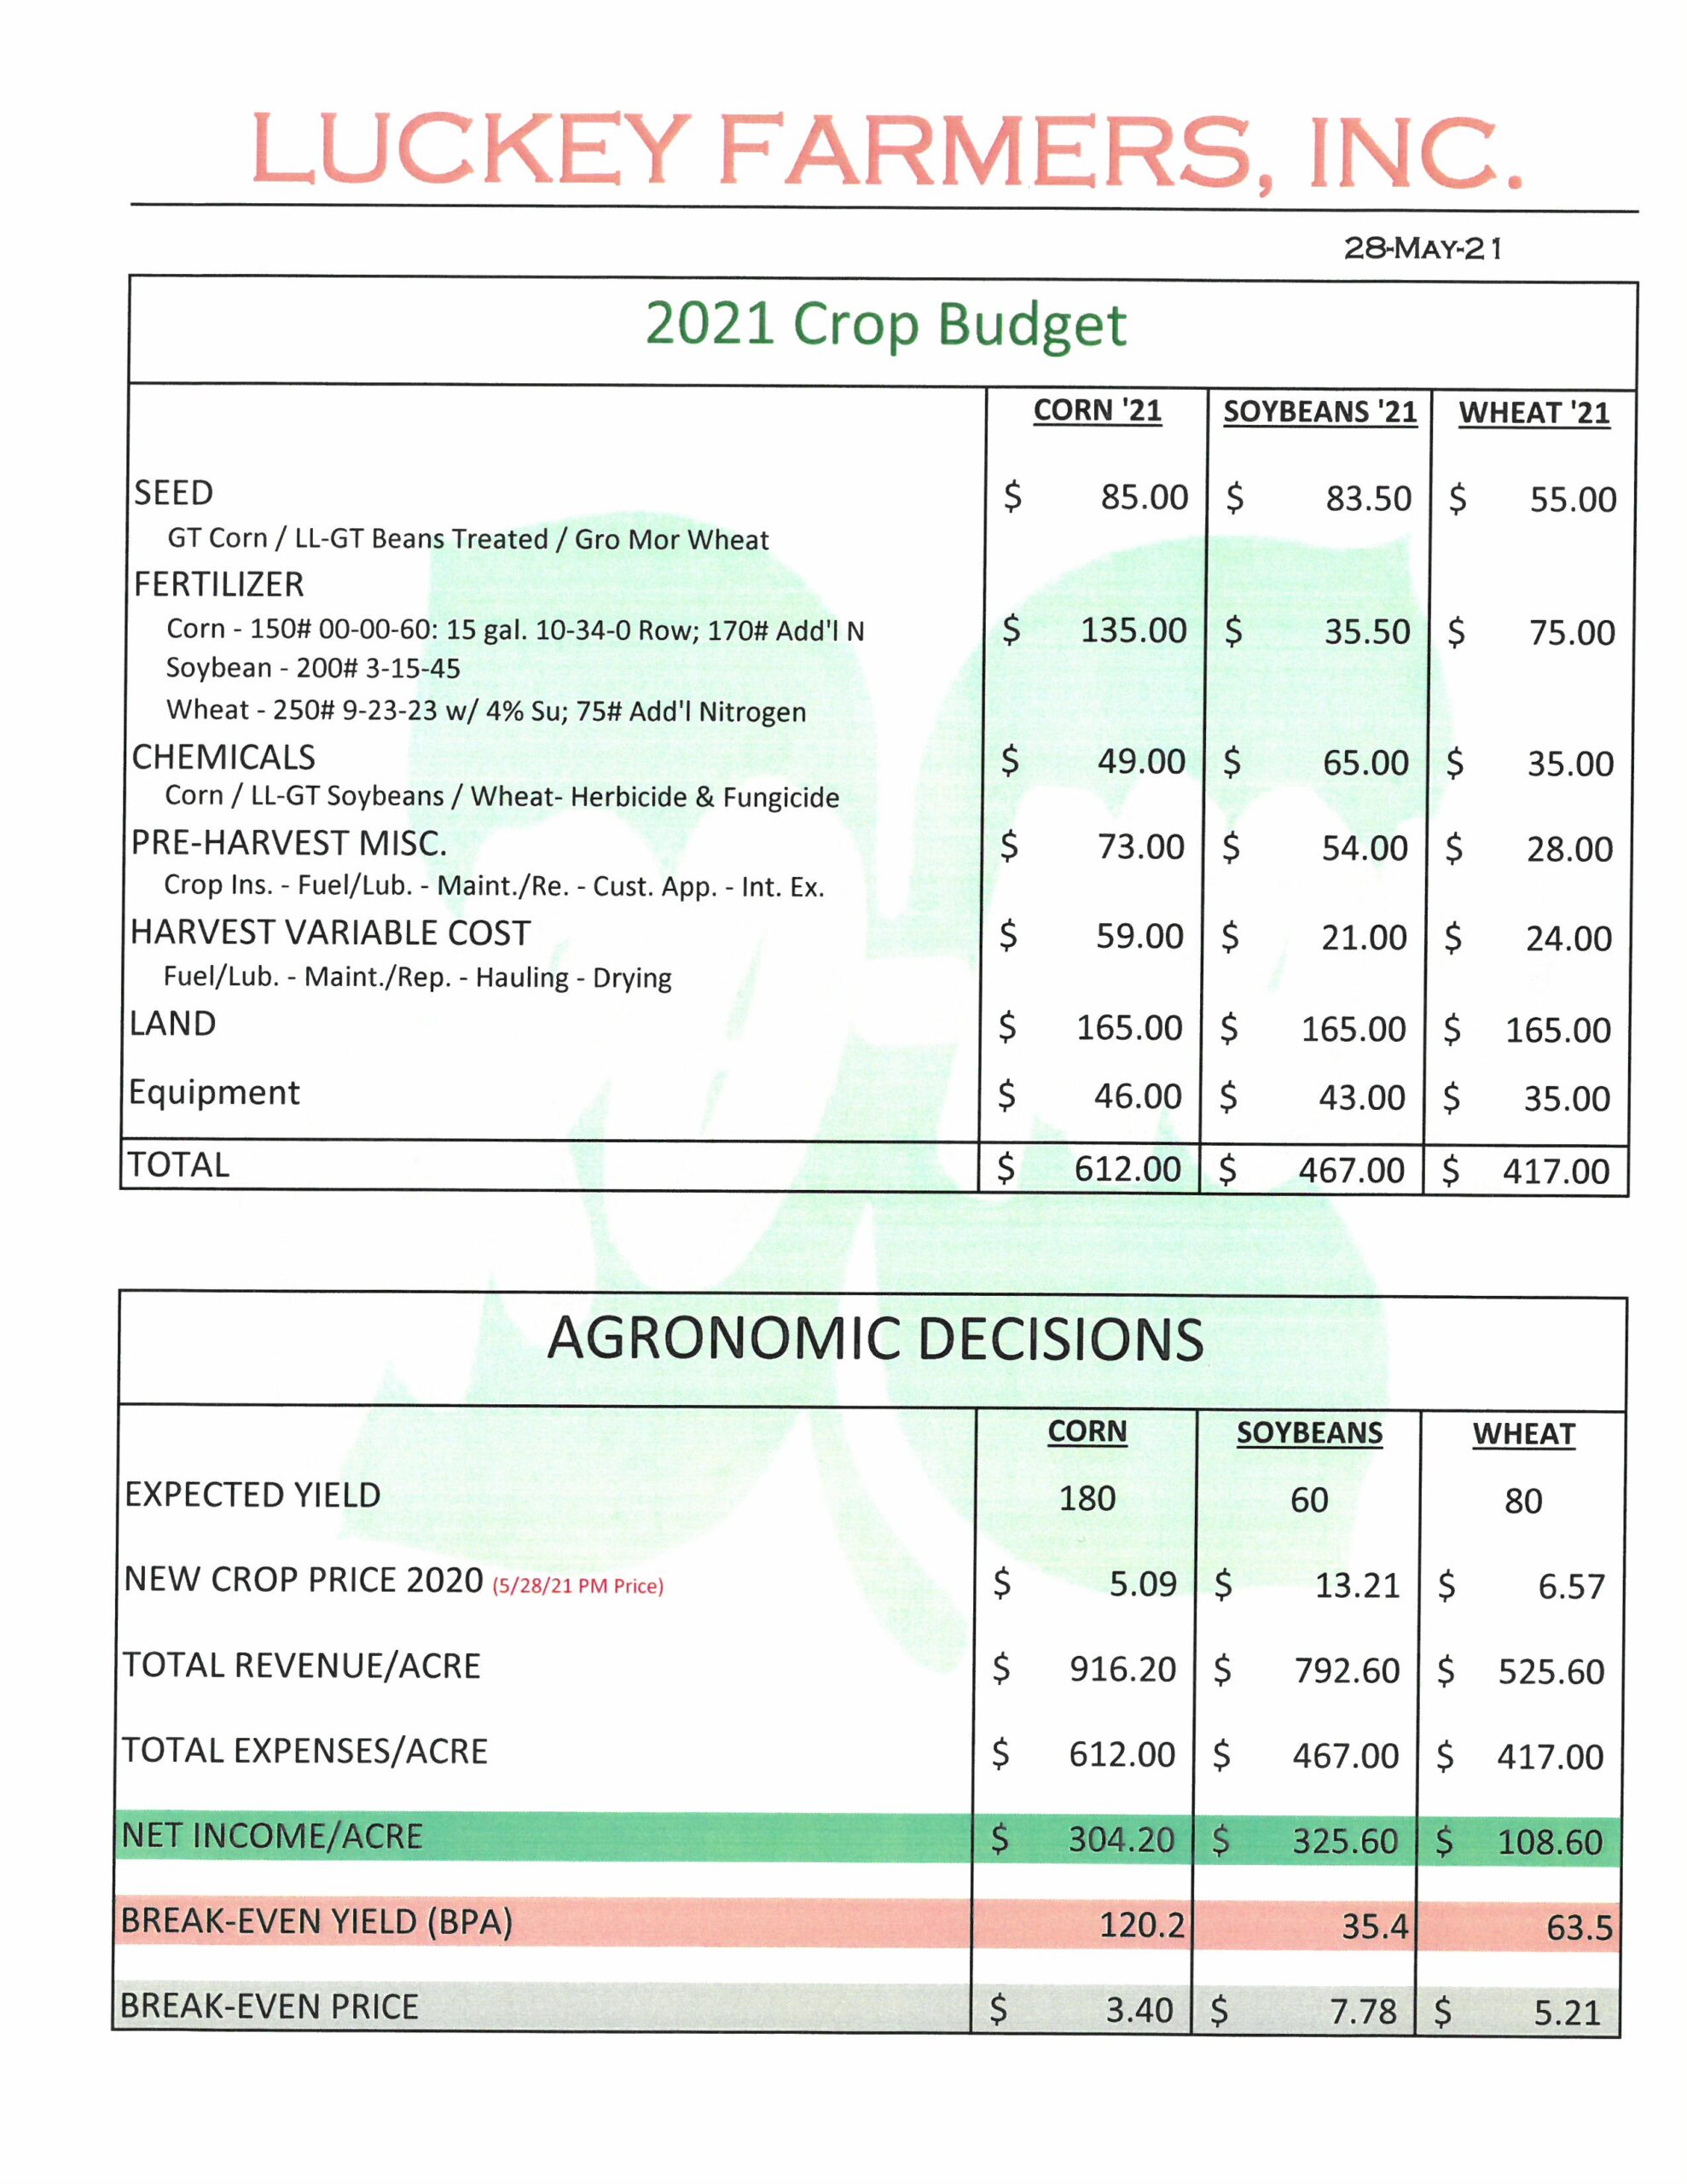 CROP BUDGETING AND REPORTS